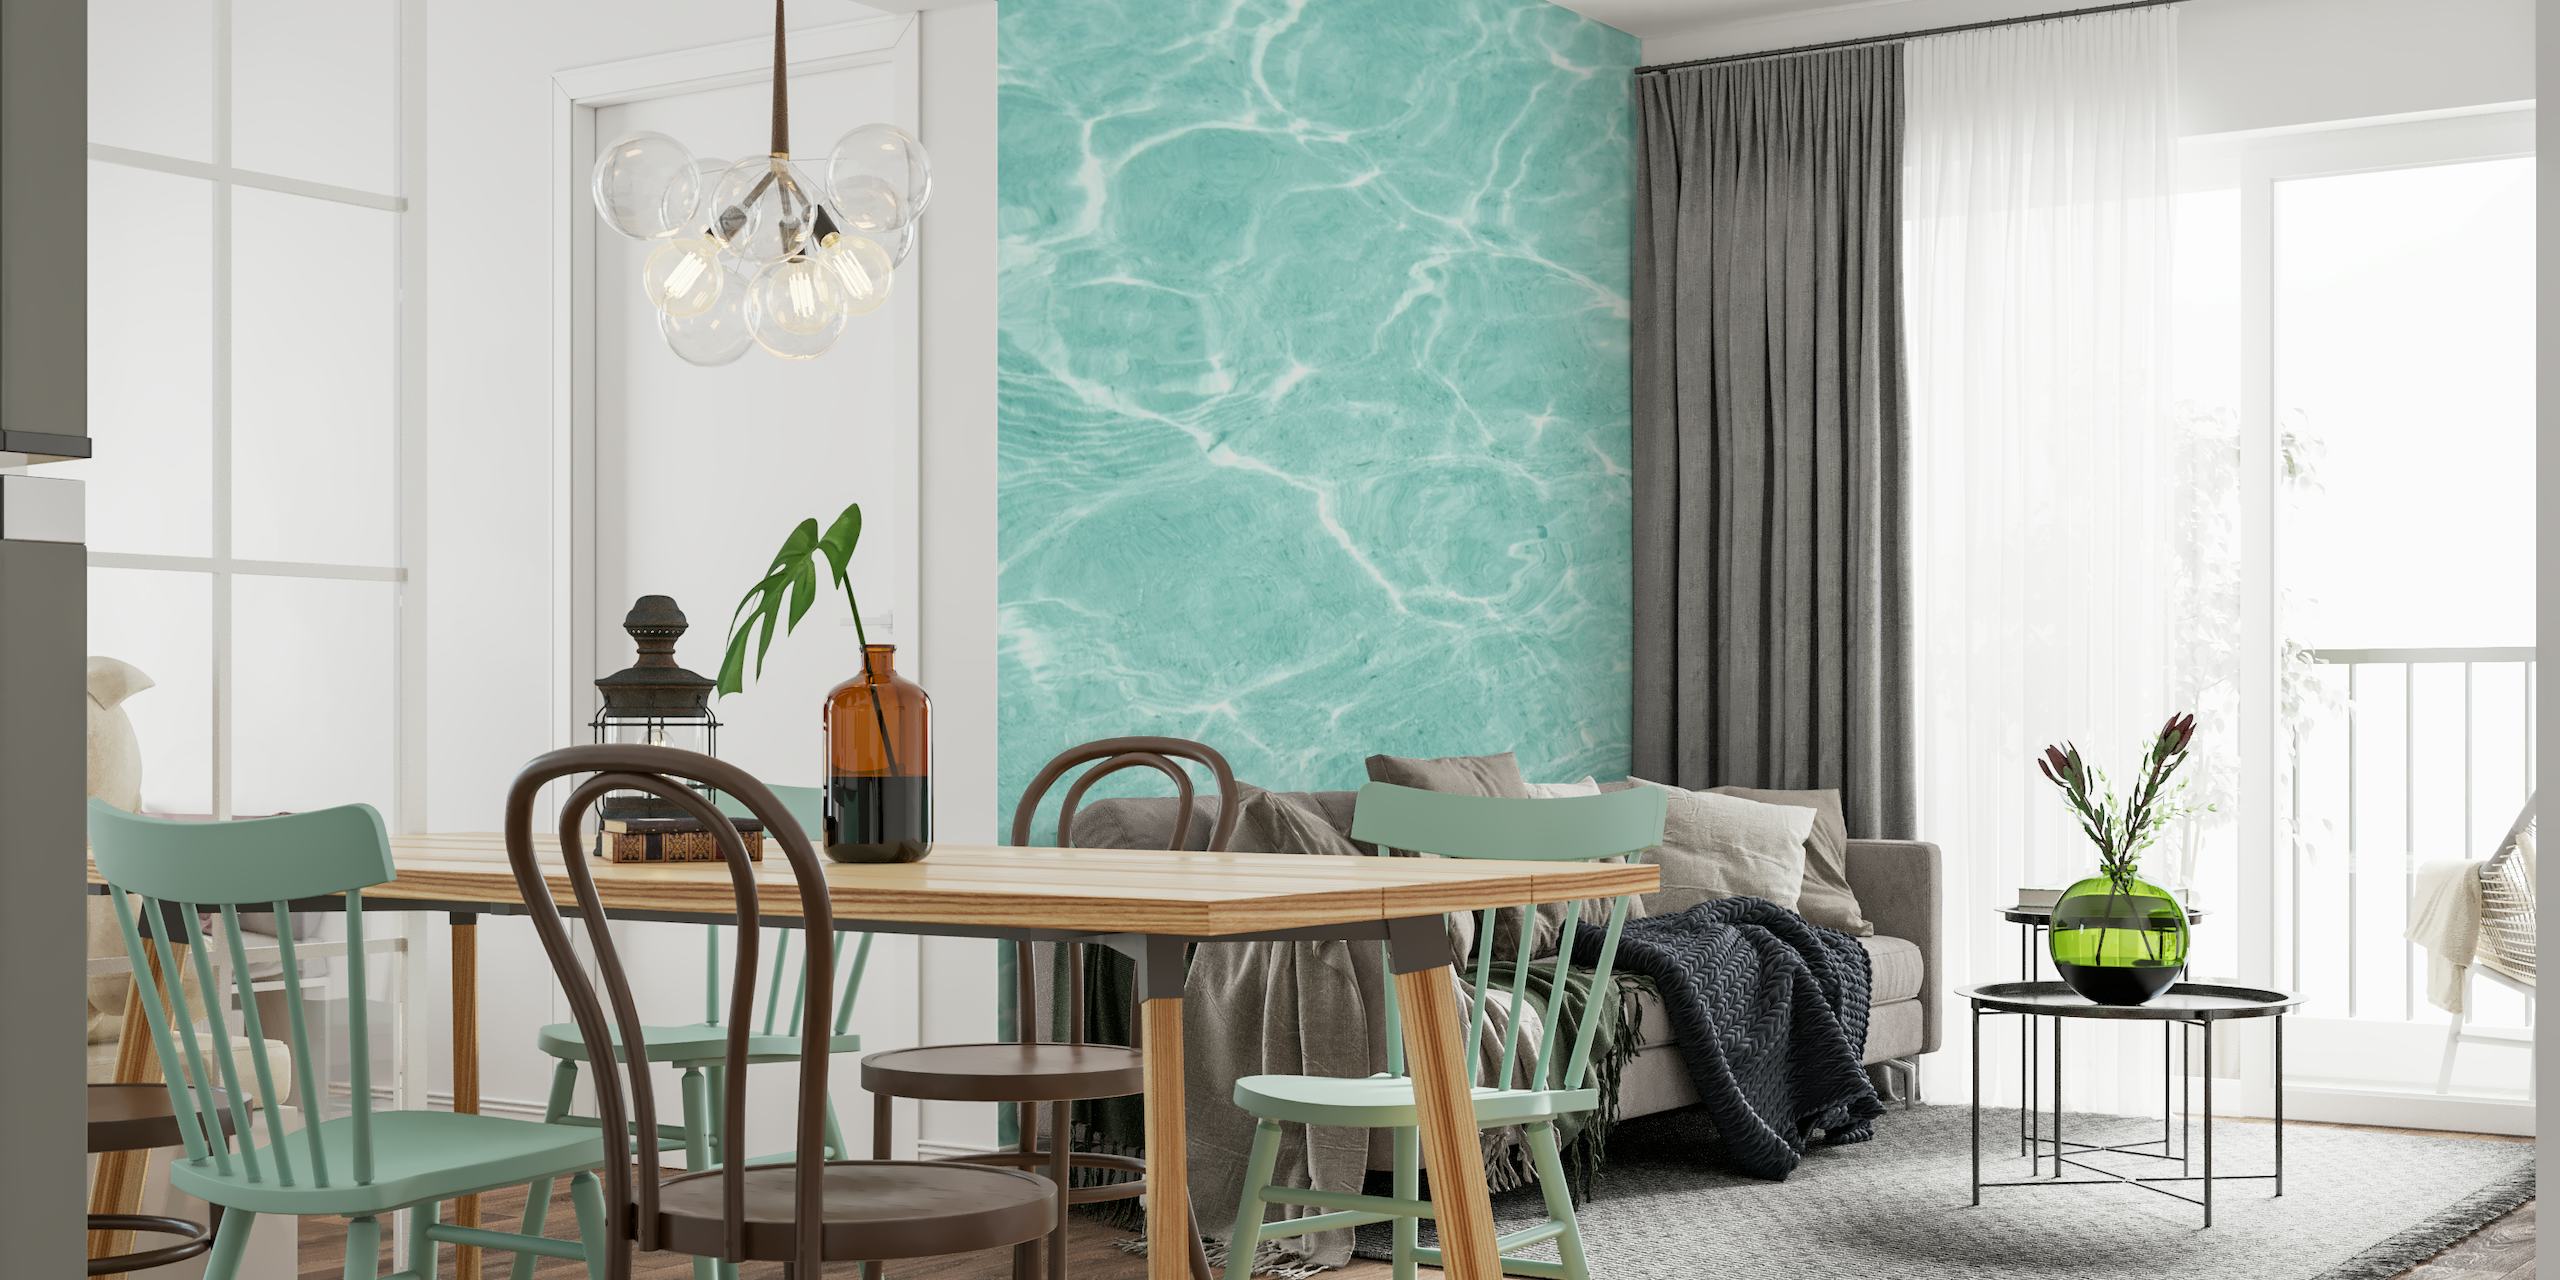 Soft turquoise water texture wall mural evoking a tranquil beachside ambiance